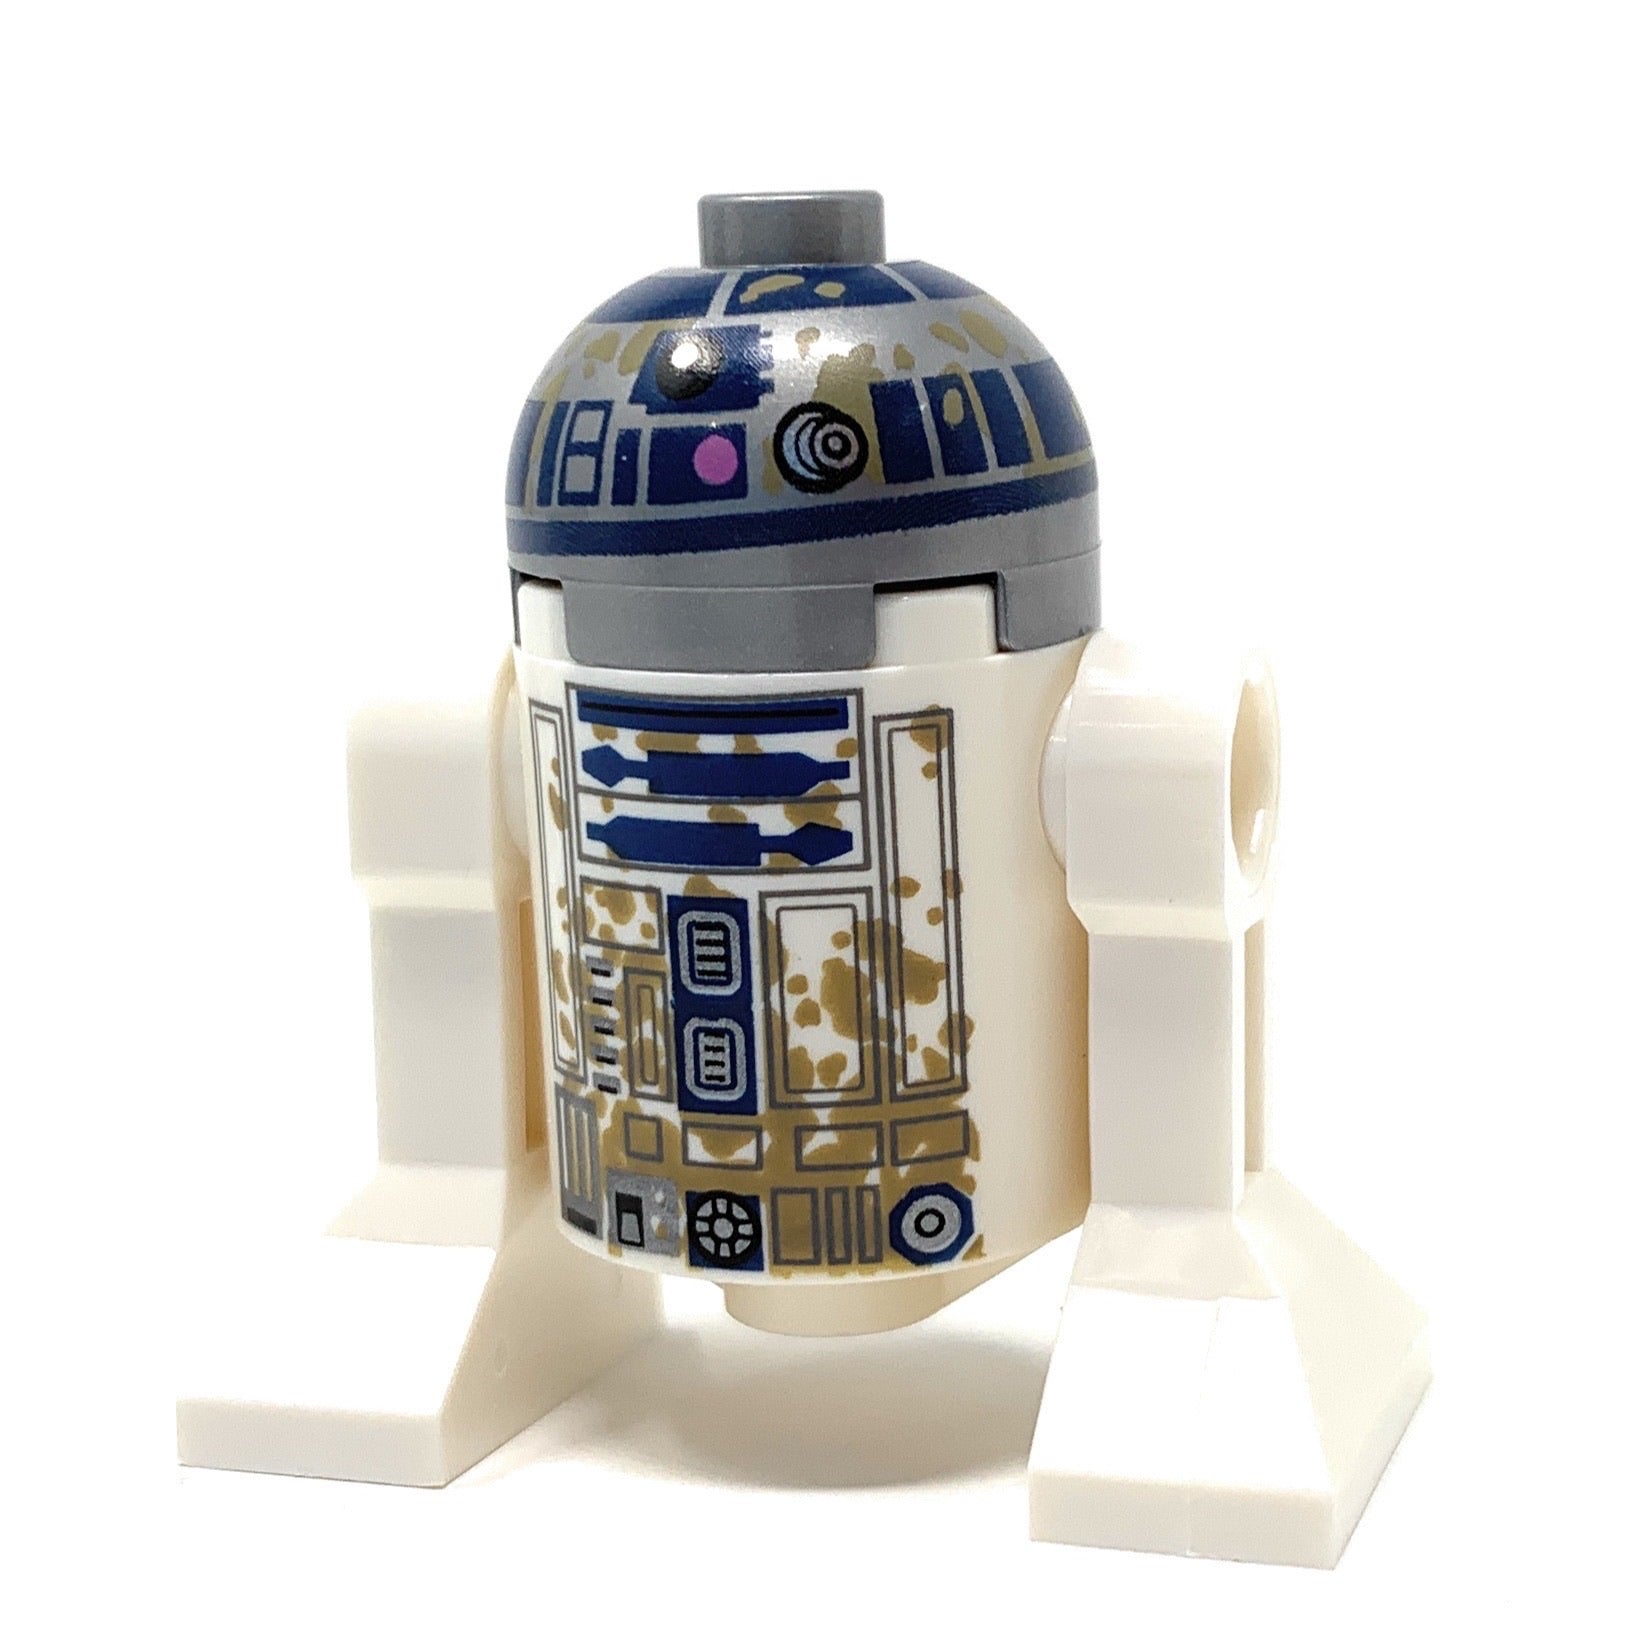 R2-D2 with Dirt Stains (Dagobah) - LEGO Star Wars Minifigure (2018)